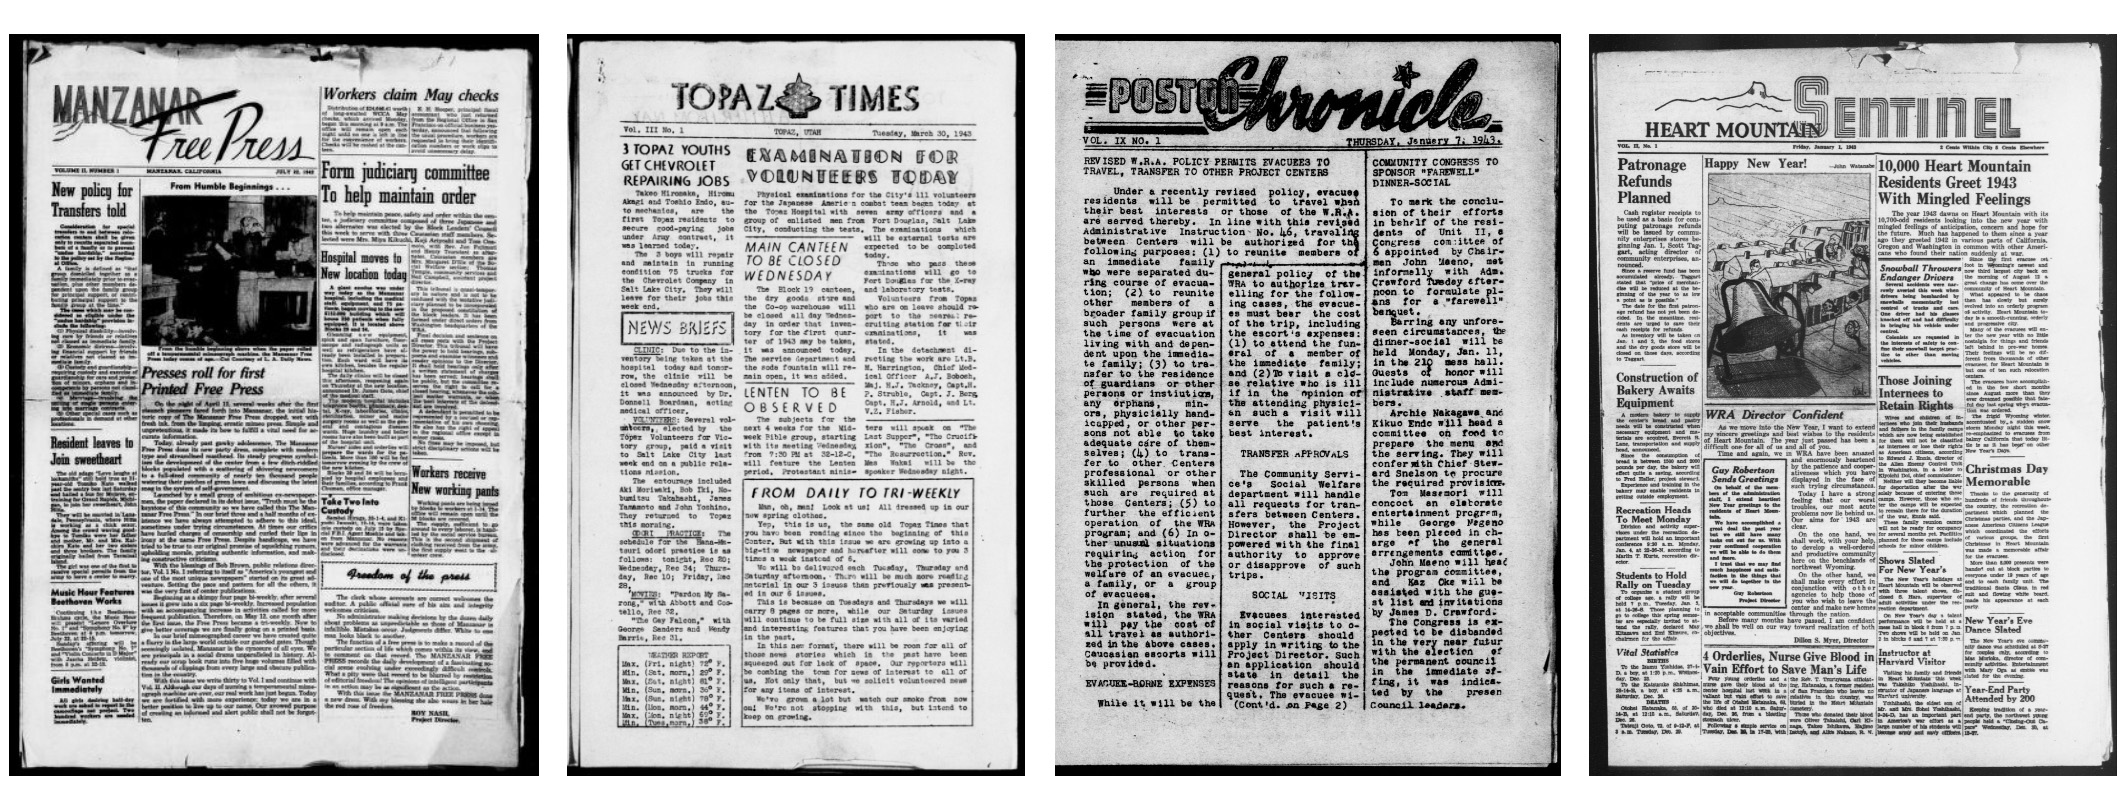 Left: Manzanar Free Press, July 22, 1942;  Left Centre: Topaz Times, March 30, 1943;  Right Center: Poston Chronicle, January 7, 1943;  Right: Heart Mountain Sentinel, January 1, 1943.